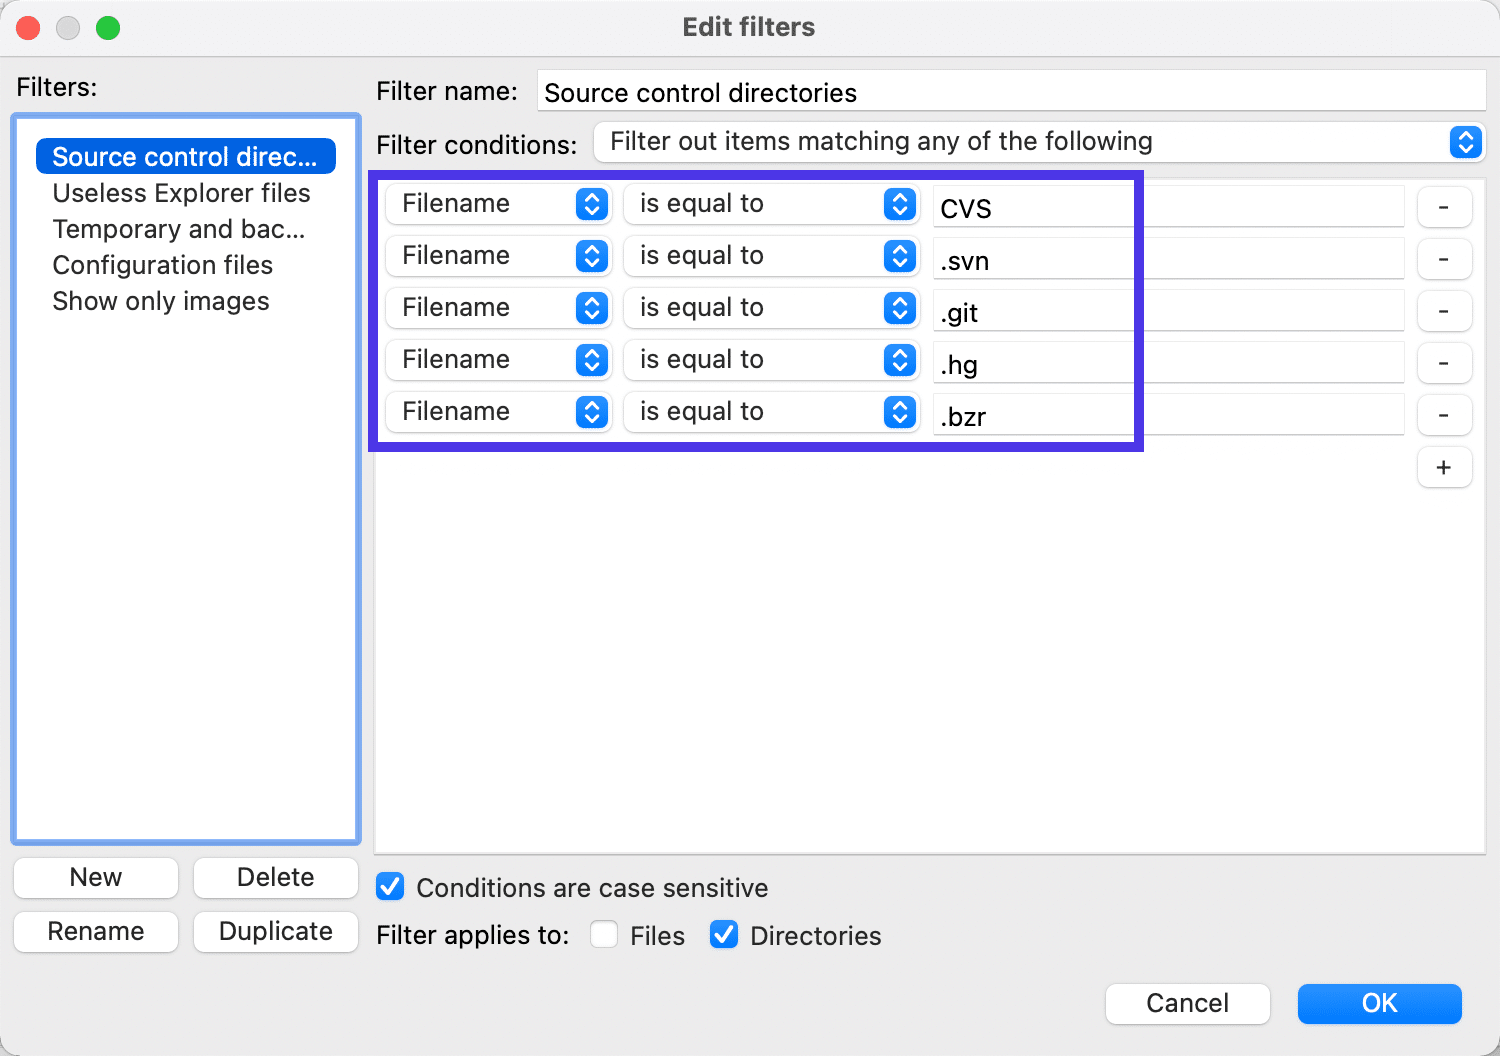 You can narrow down filters by only showing specific file extensions.